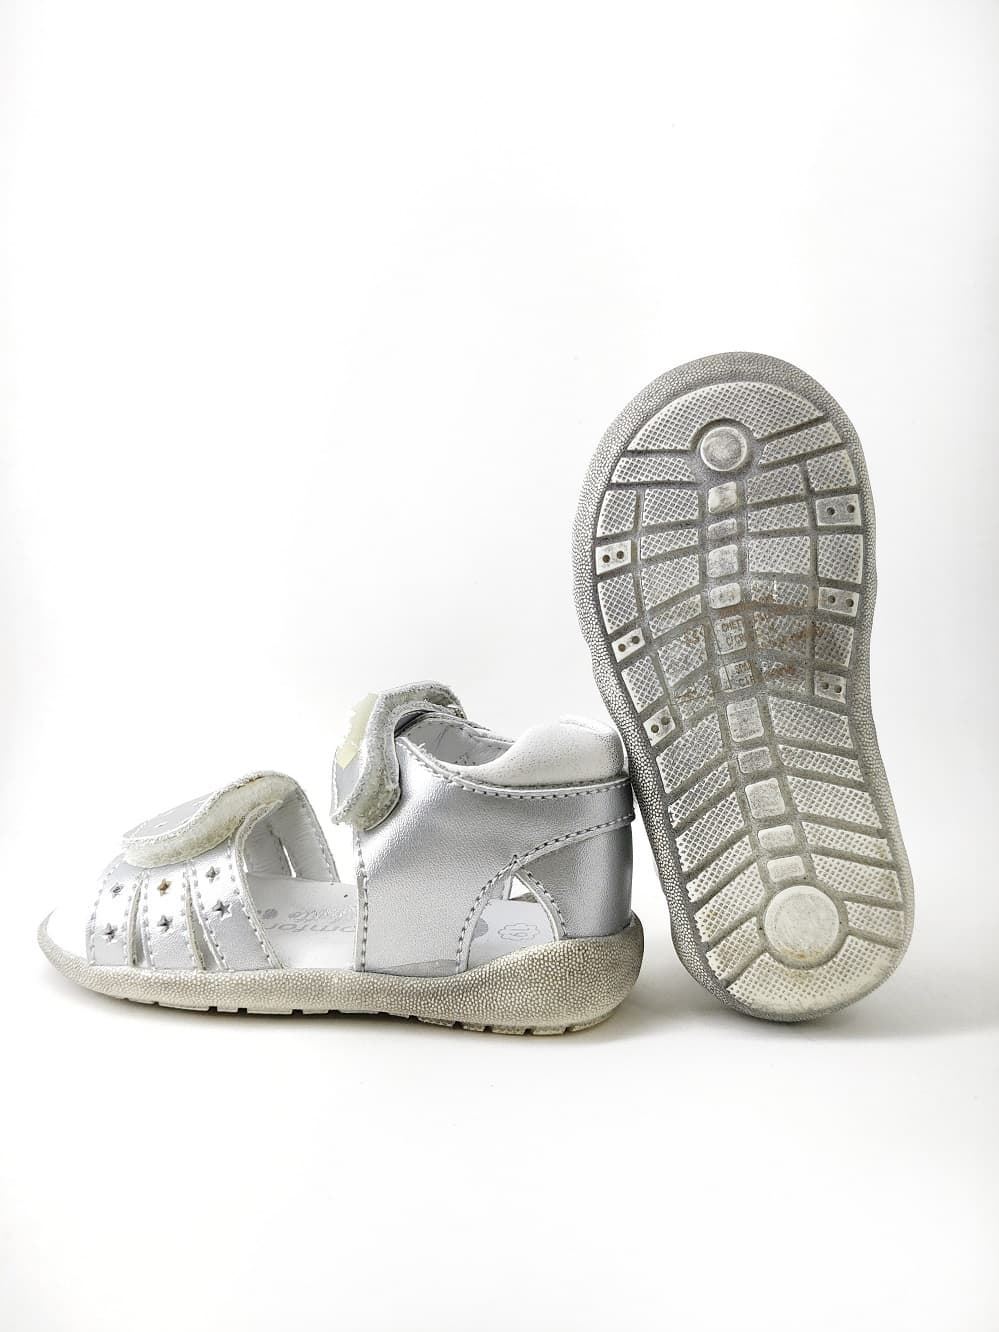 Silver sandals for baby girl with velcro - Image 4